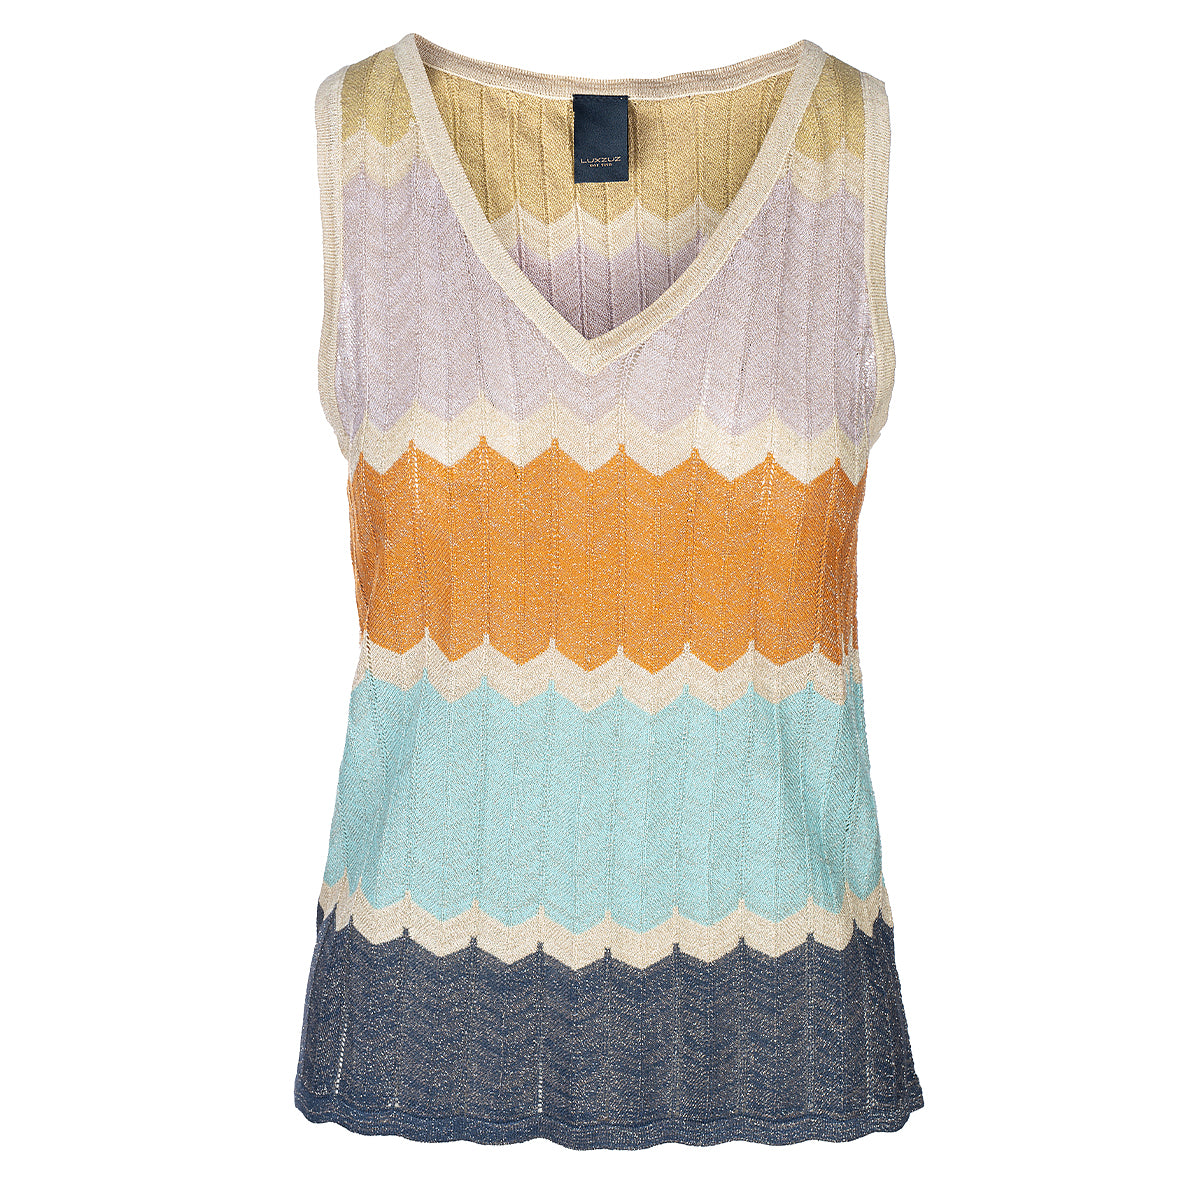 LUXZUZ // ONE TWO Quin Knit Top Knit 583 Aqua mix